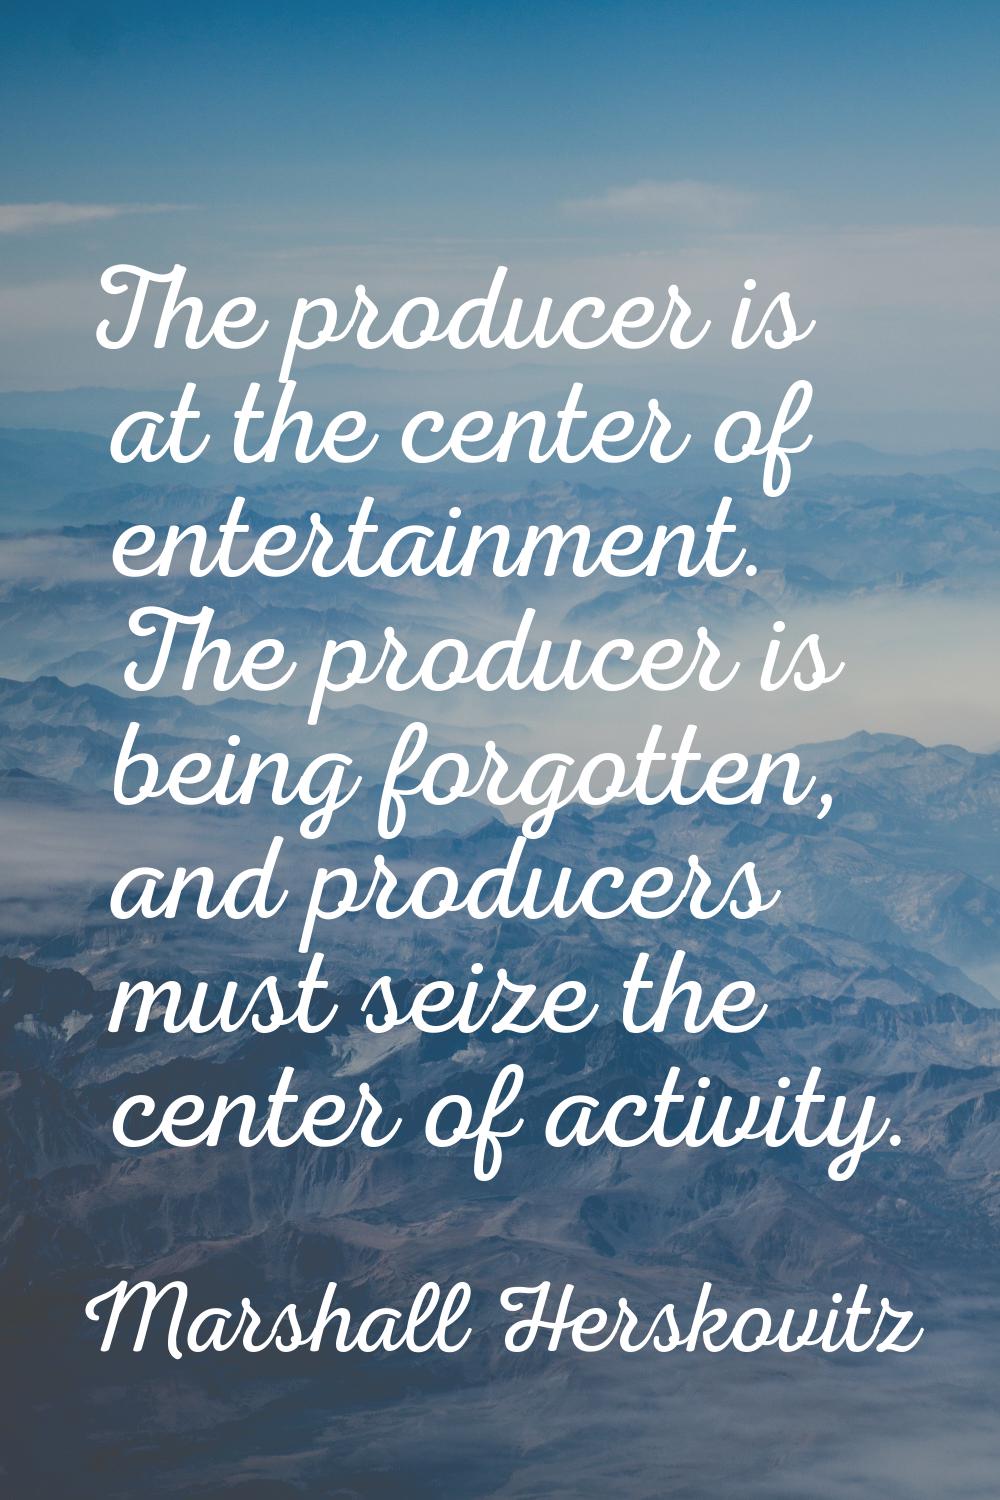 The producer is at the center of entertainment. The producer is being forgotten, and producers must